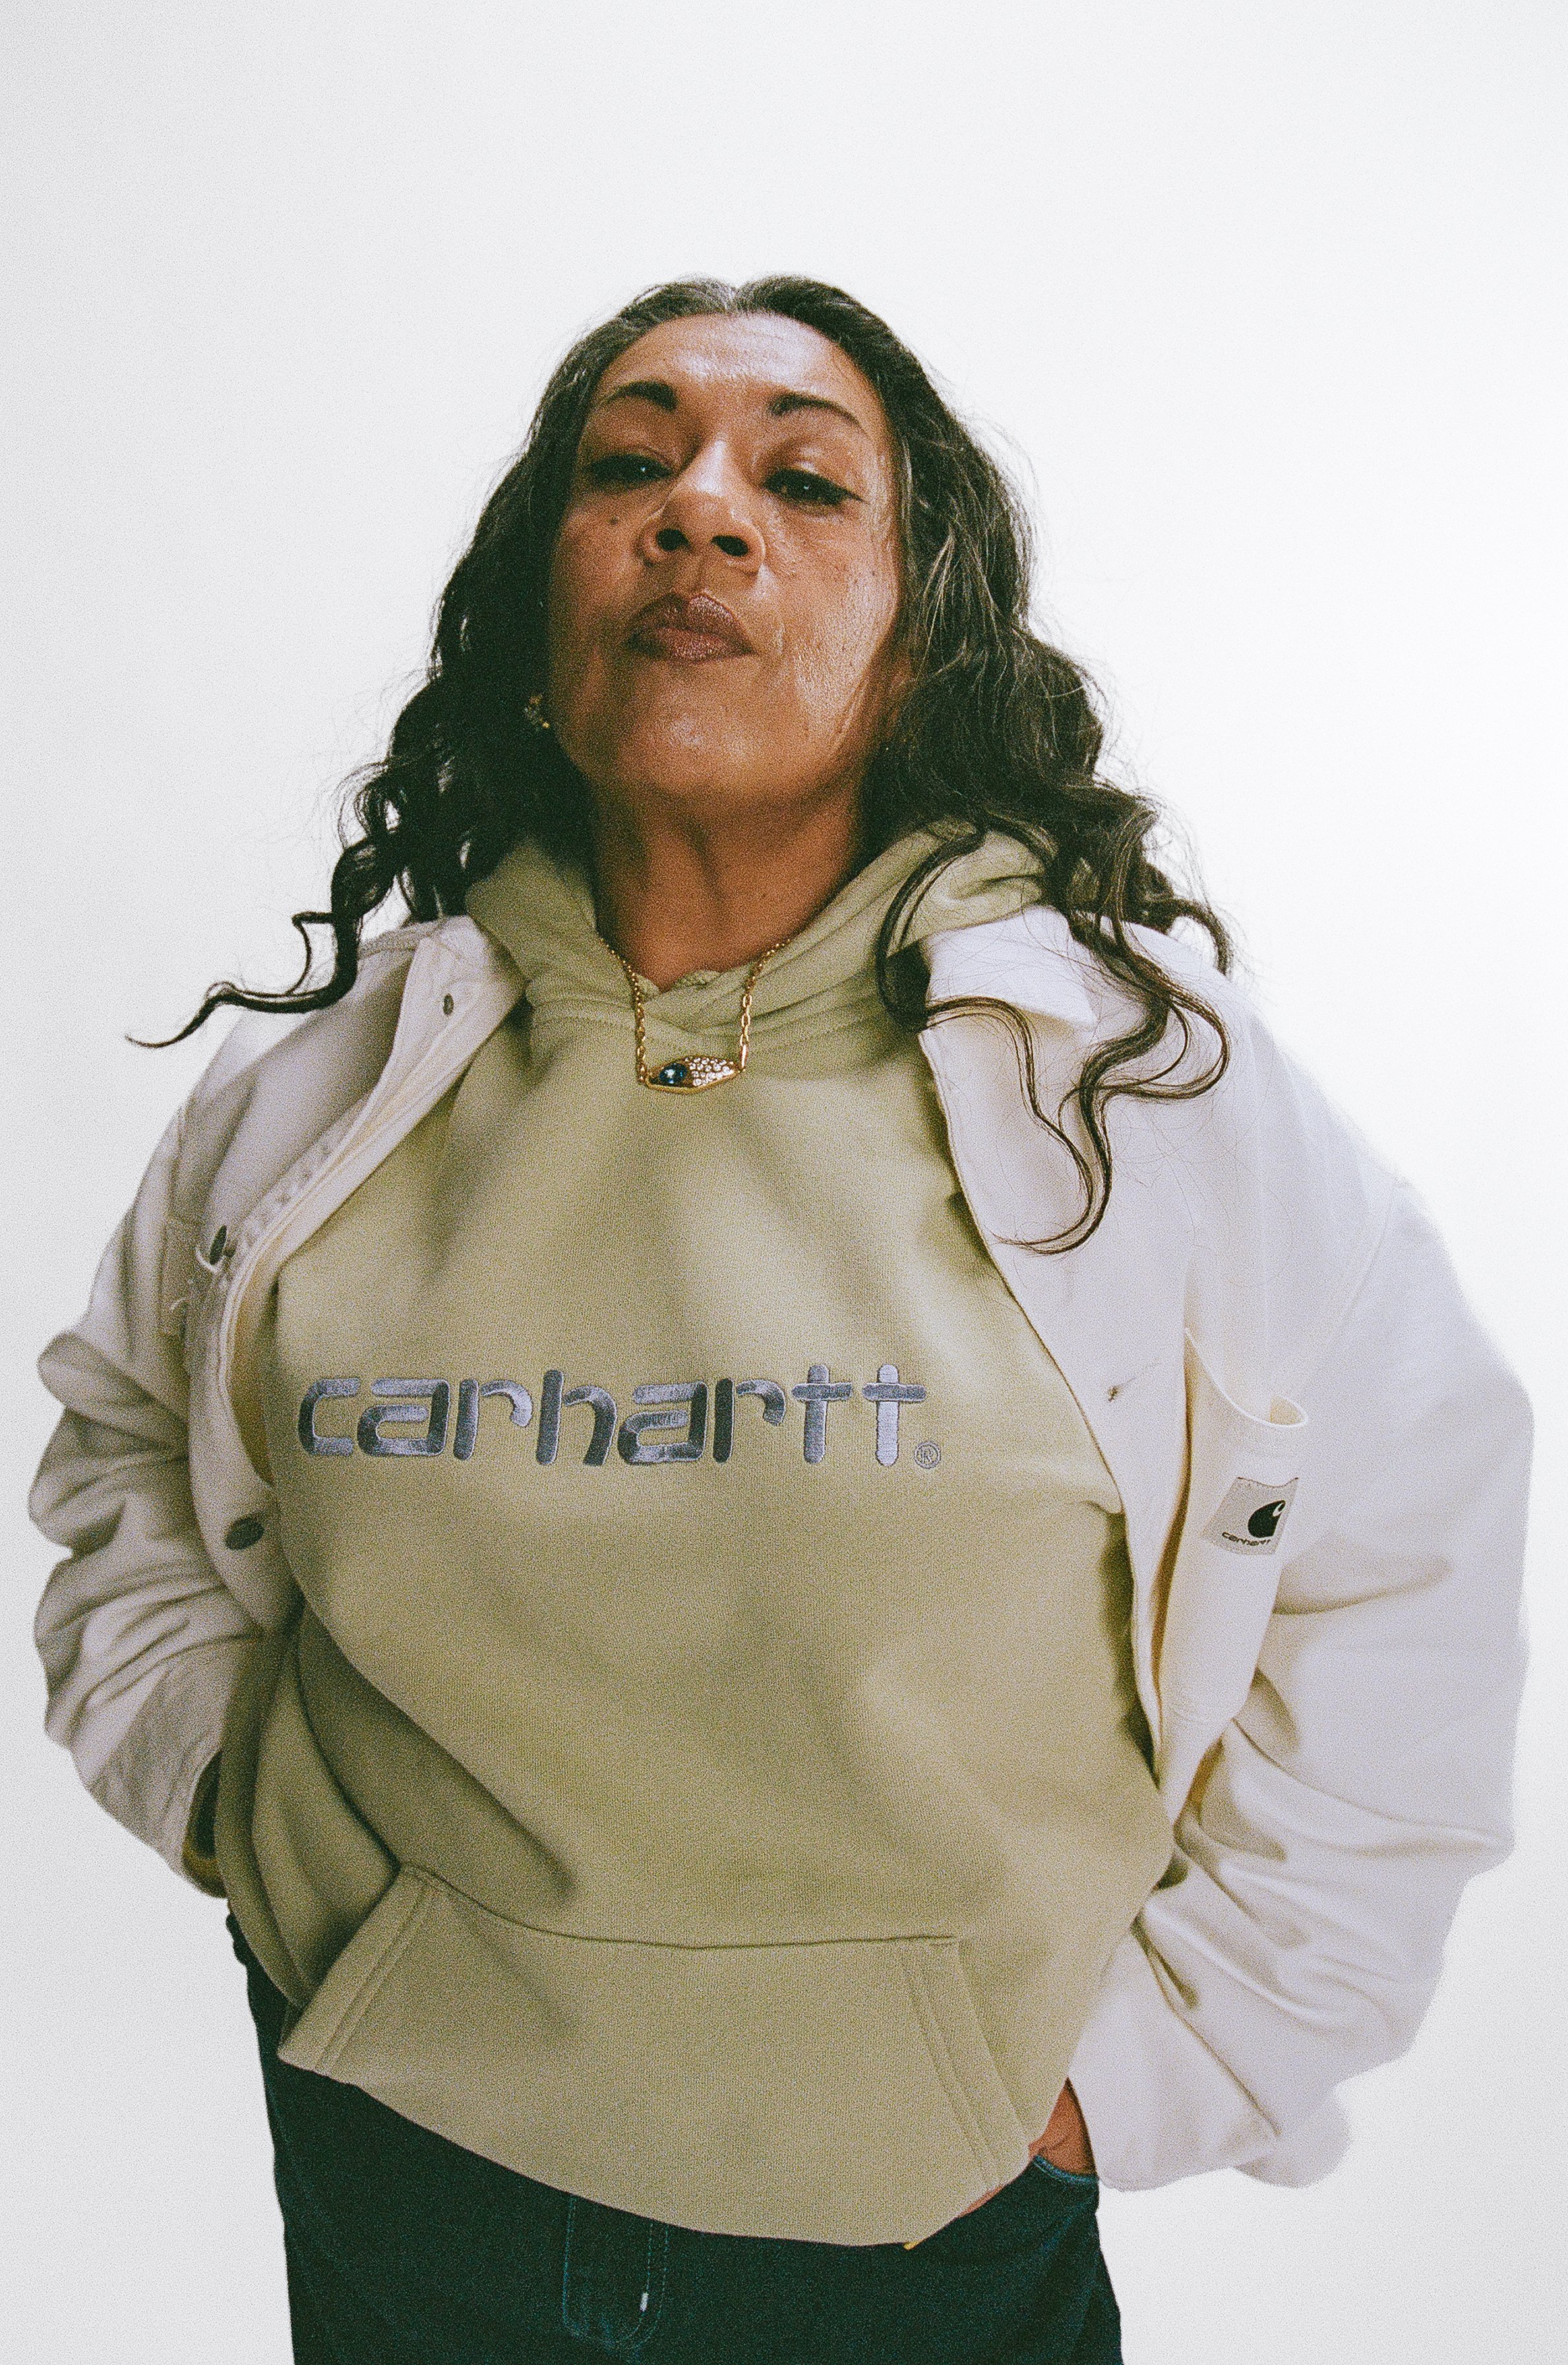 Jessica - L2 - Carhartt WIP Submission R1 Final Selects5.jpeg